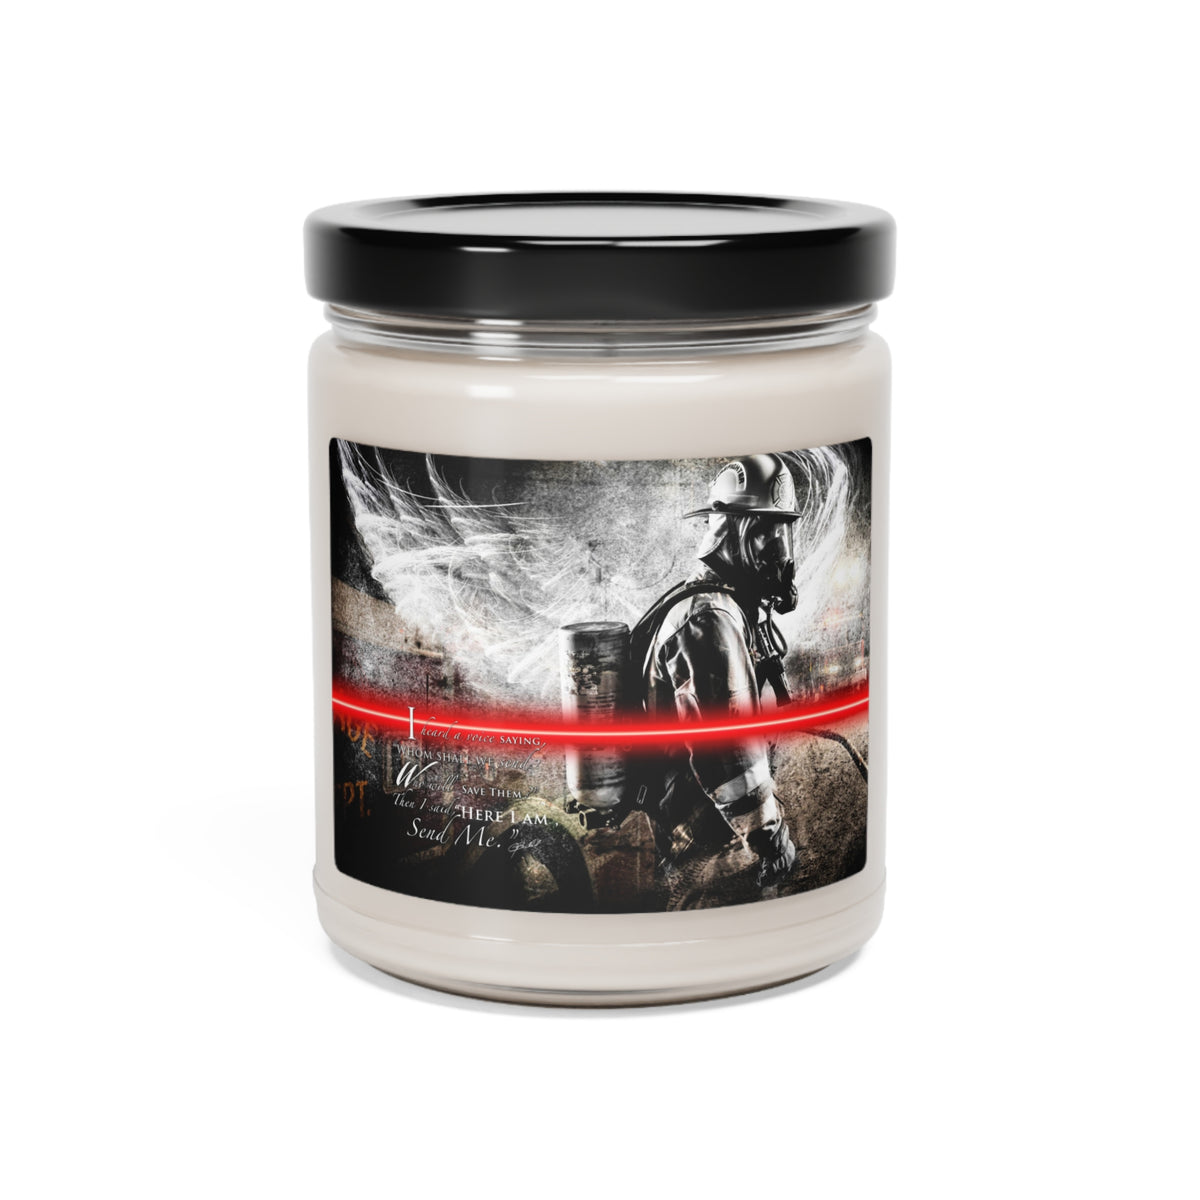 Send Me Firefighter 9oz Scented Soy Candle